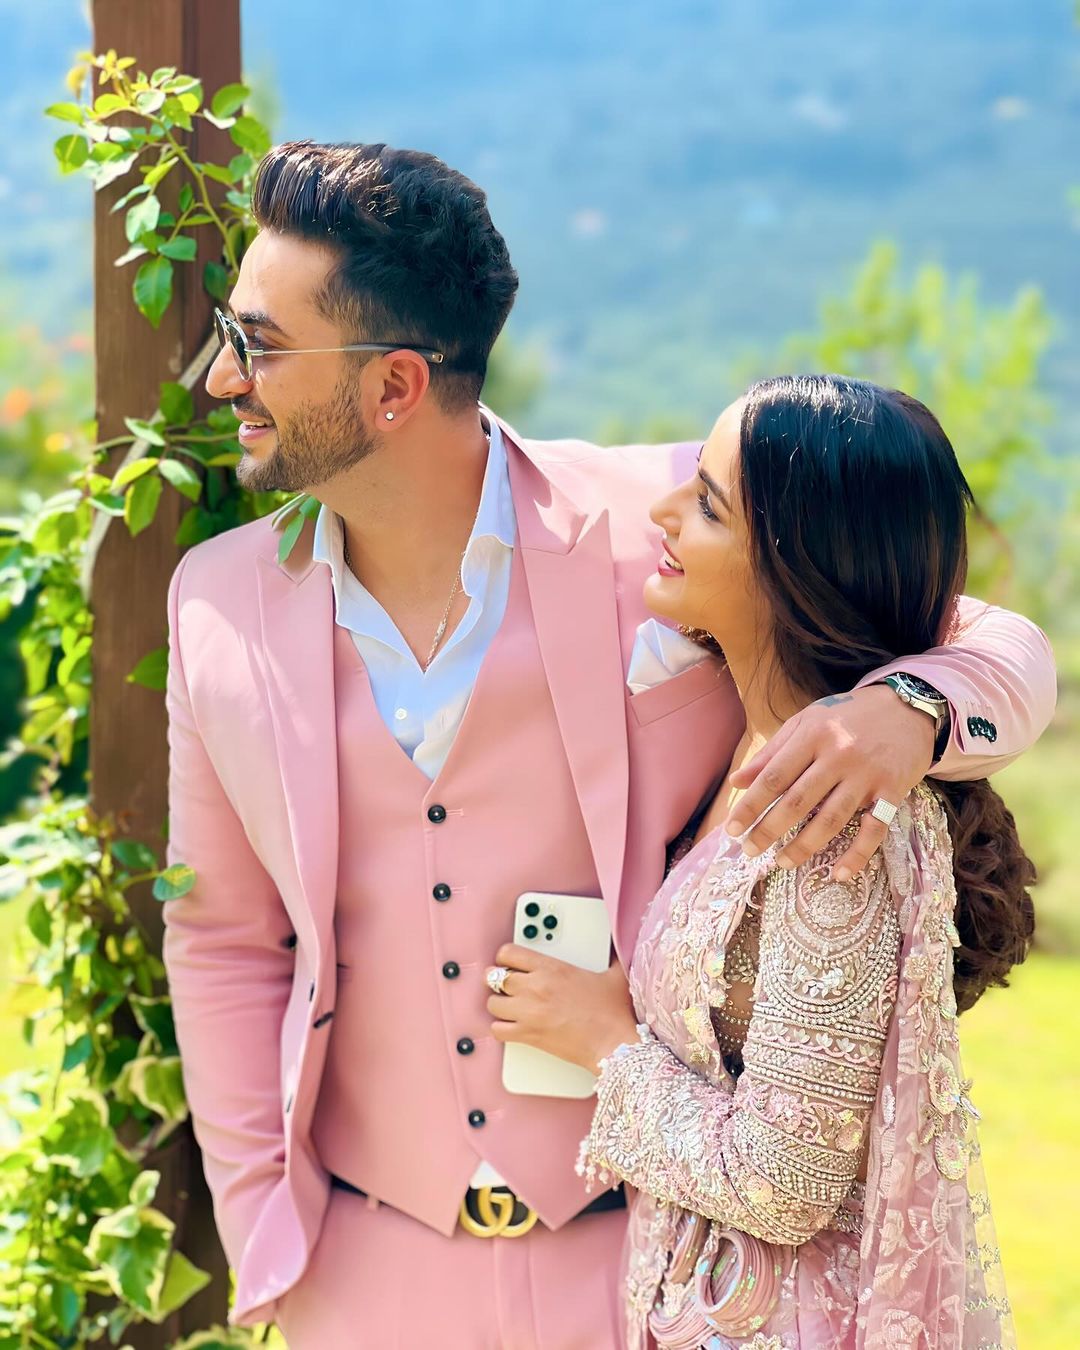 Aly Goni Spent A Heart-Warming Moment With His Love Lady Jasmin Bhasin. Let’s Talk About Their Wow Moments On His Birthday!